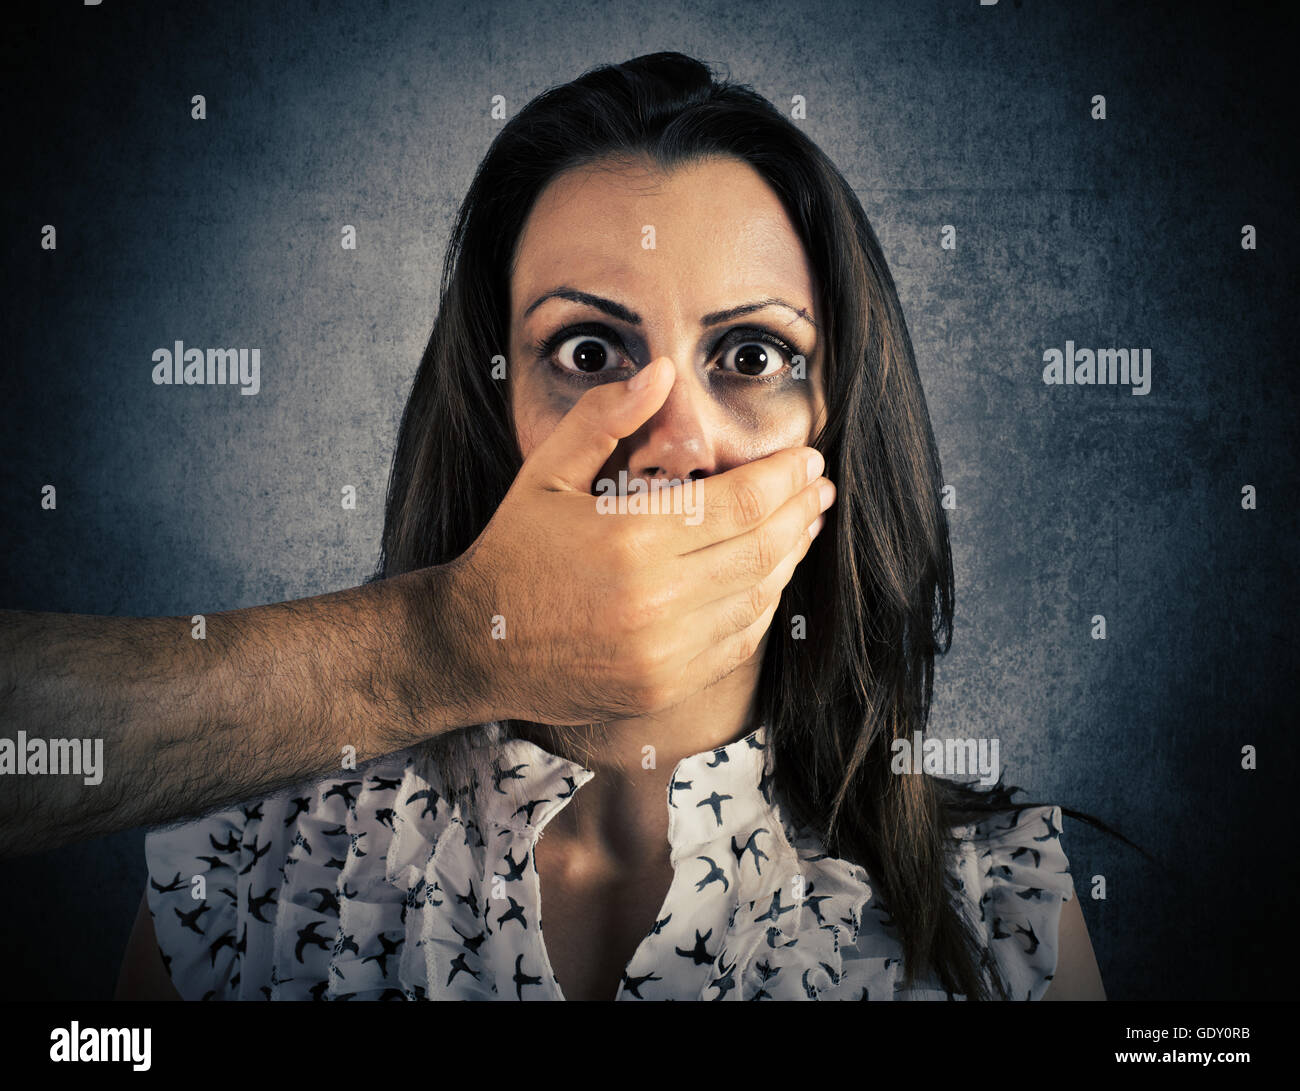 Woman terrified by the violence Stock Photo